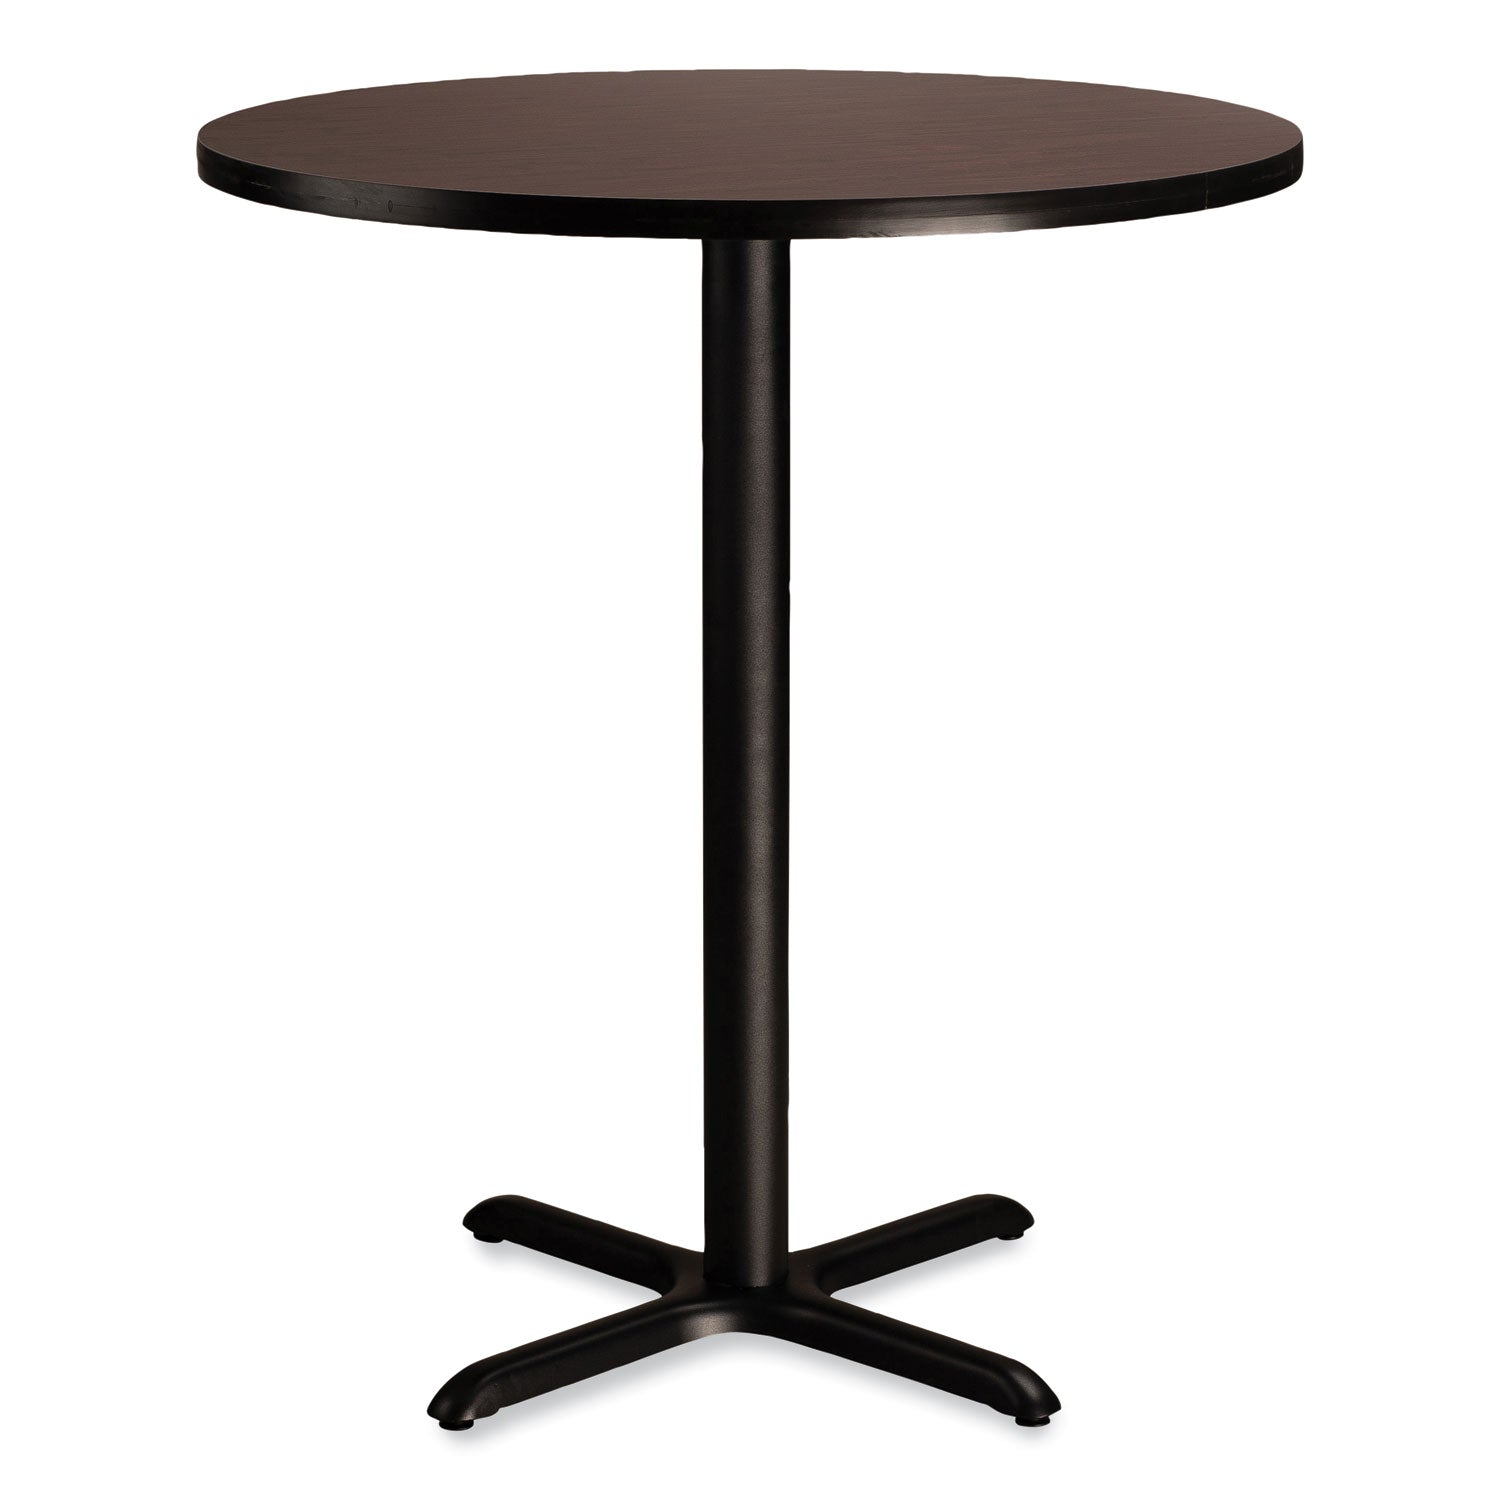 cafe-table-36-diameter-x-42h-round-top-x-base-mahogany-top-black-base-ships-in-7-10-business-days_npsct13636xb1my - 1